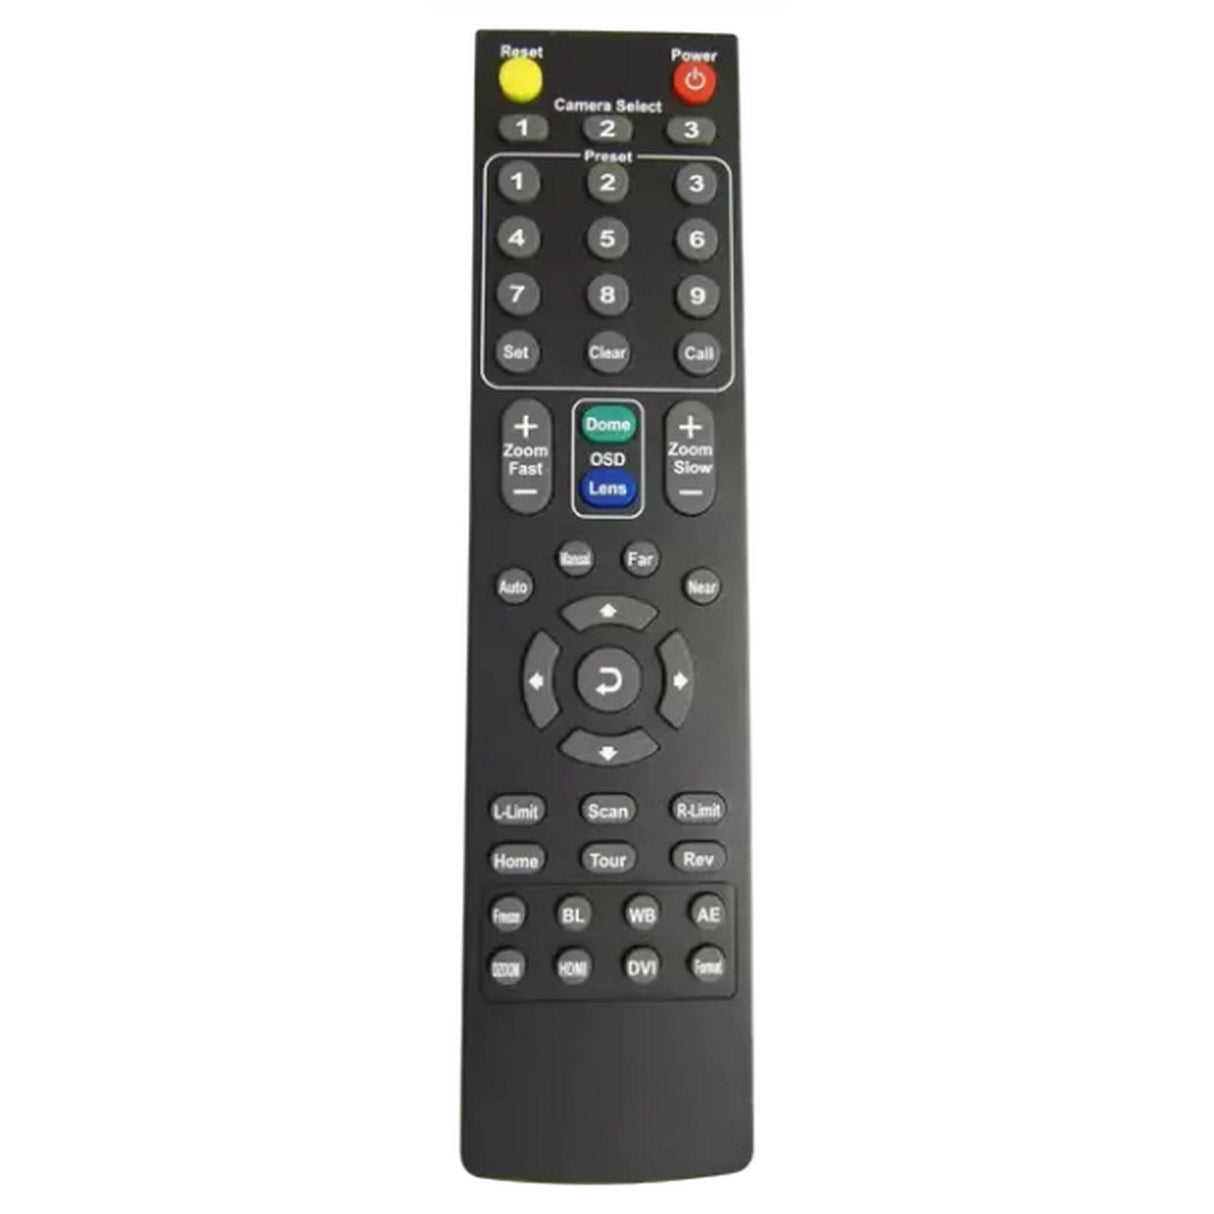 HuddleCamHD HC-REMOTE Spare Remote for 3X, 3X Wide, 10X-720, 10X, 20X and 30X Cameras